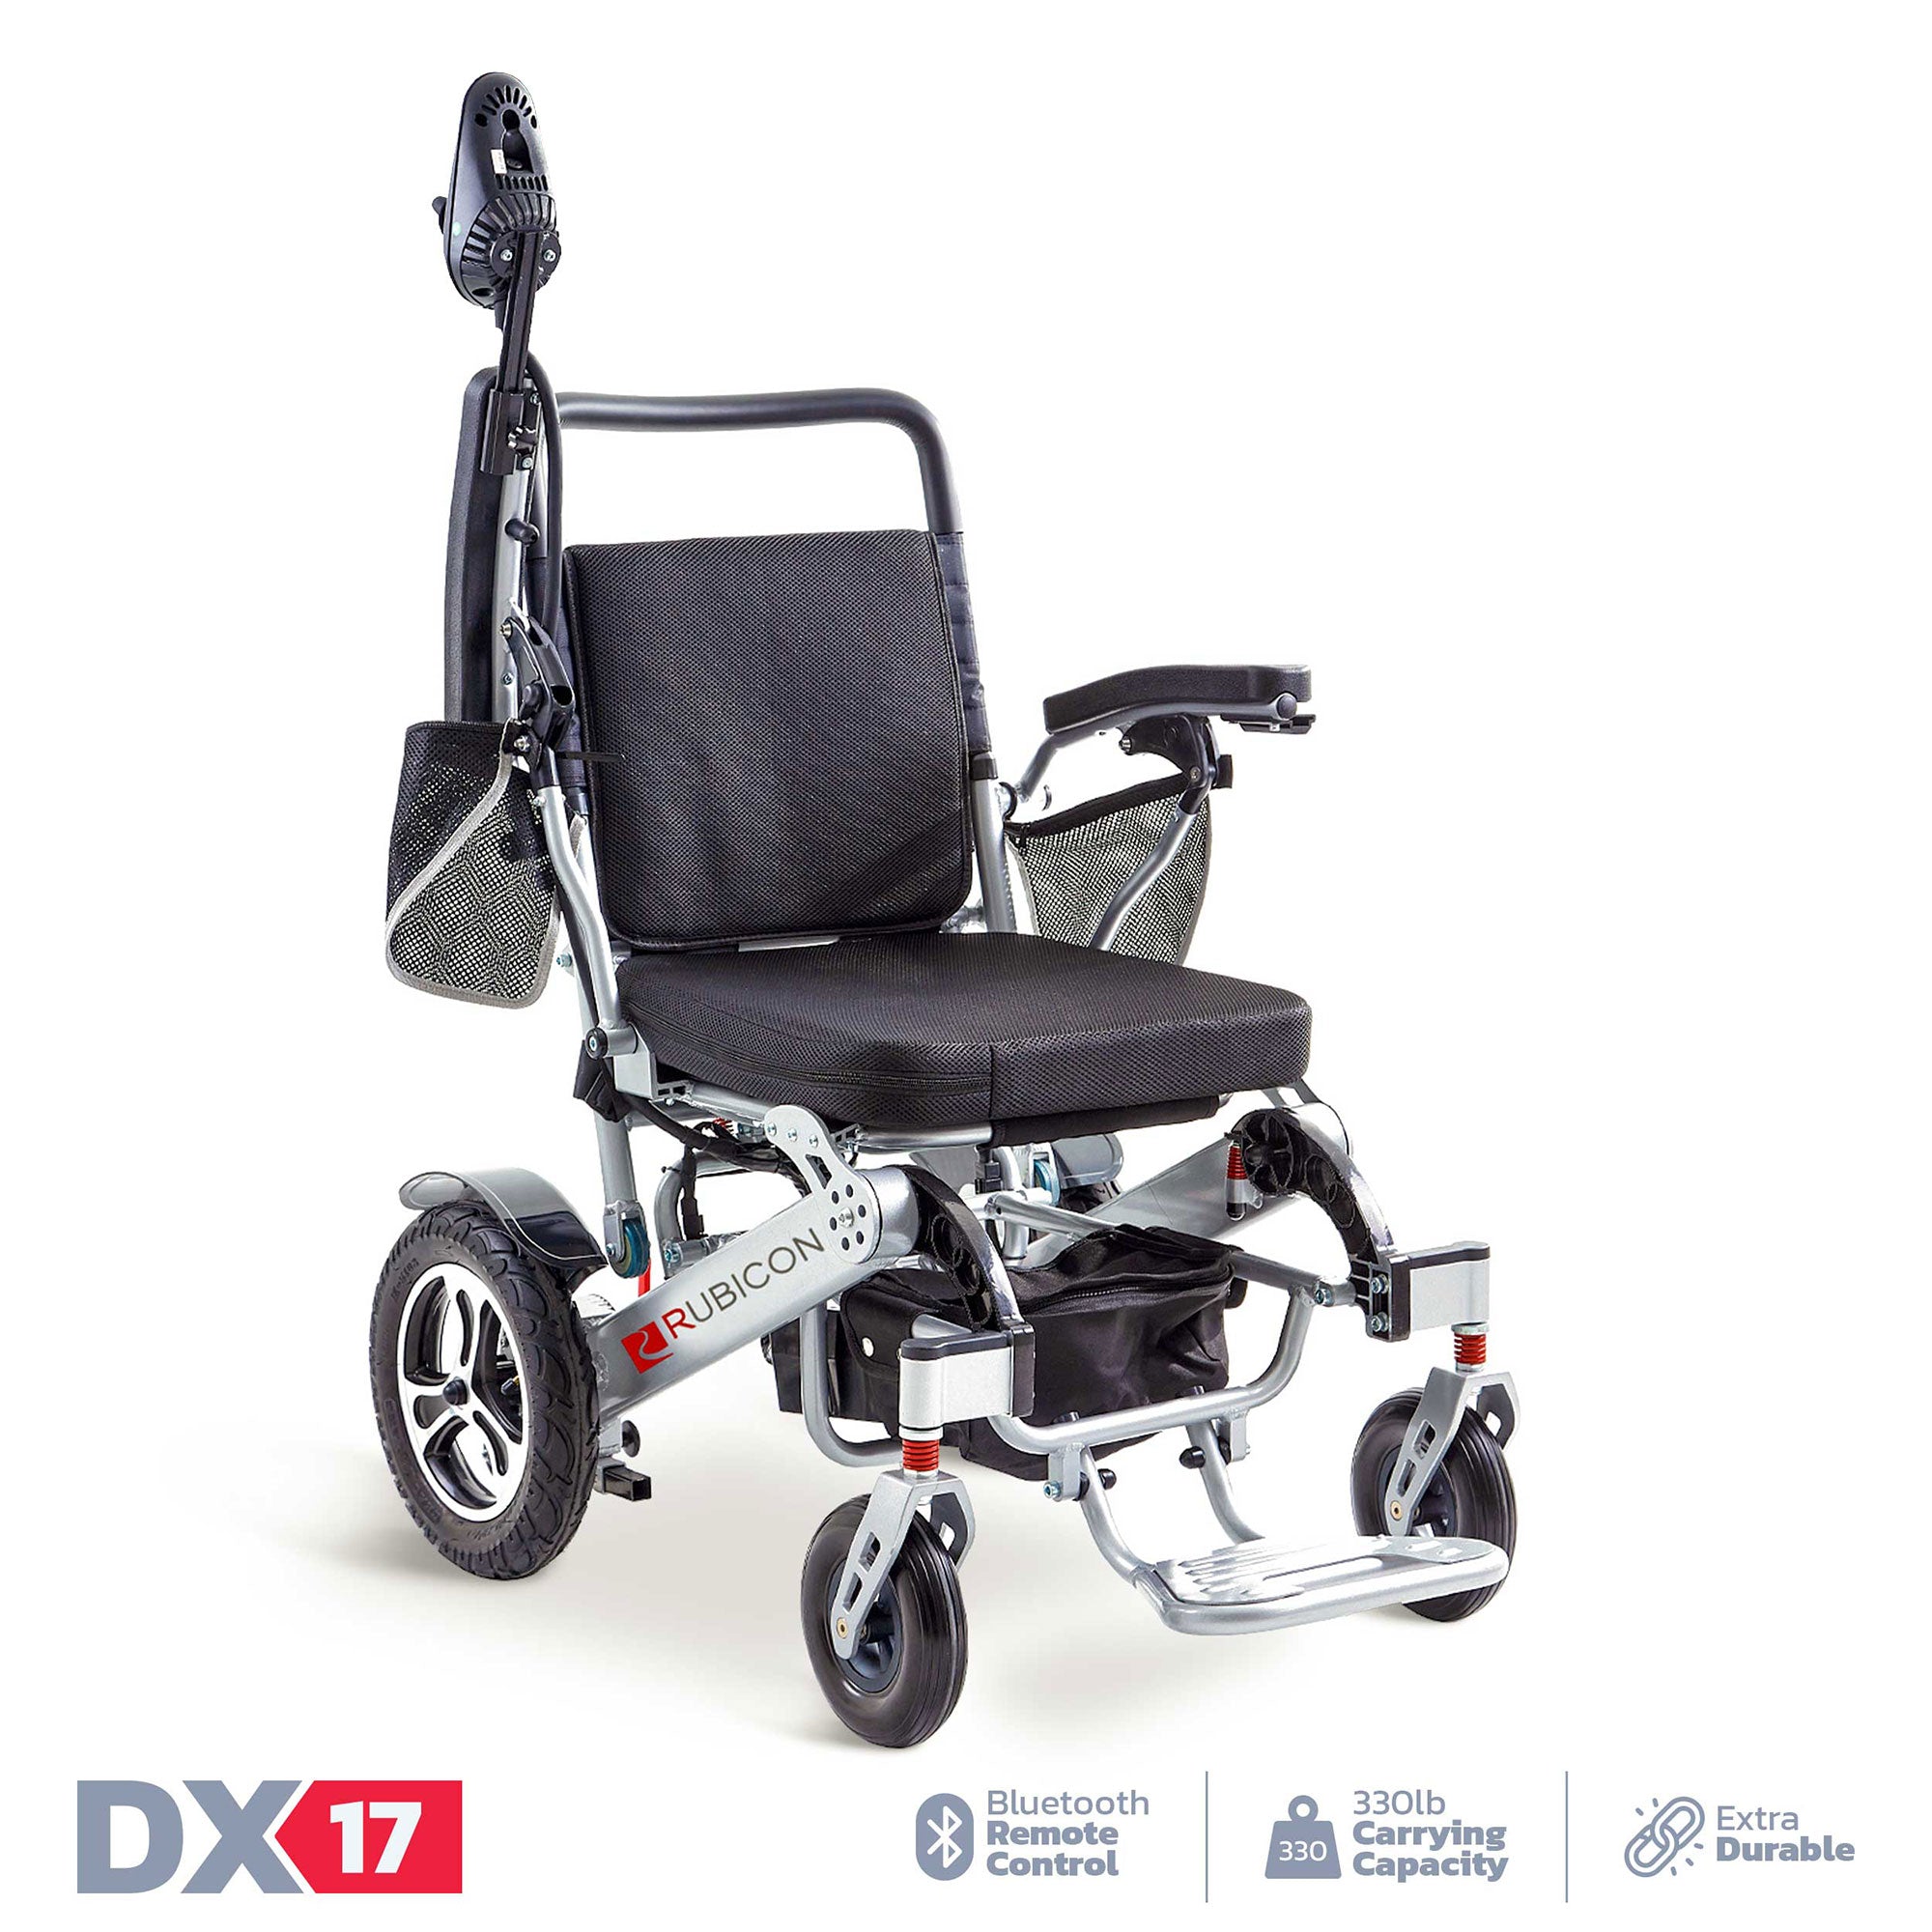 Rubicon DX17 - Automatic Fold-Unfold Electric Wheelchair - Electricwheelchair.Store